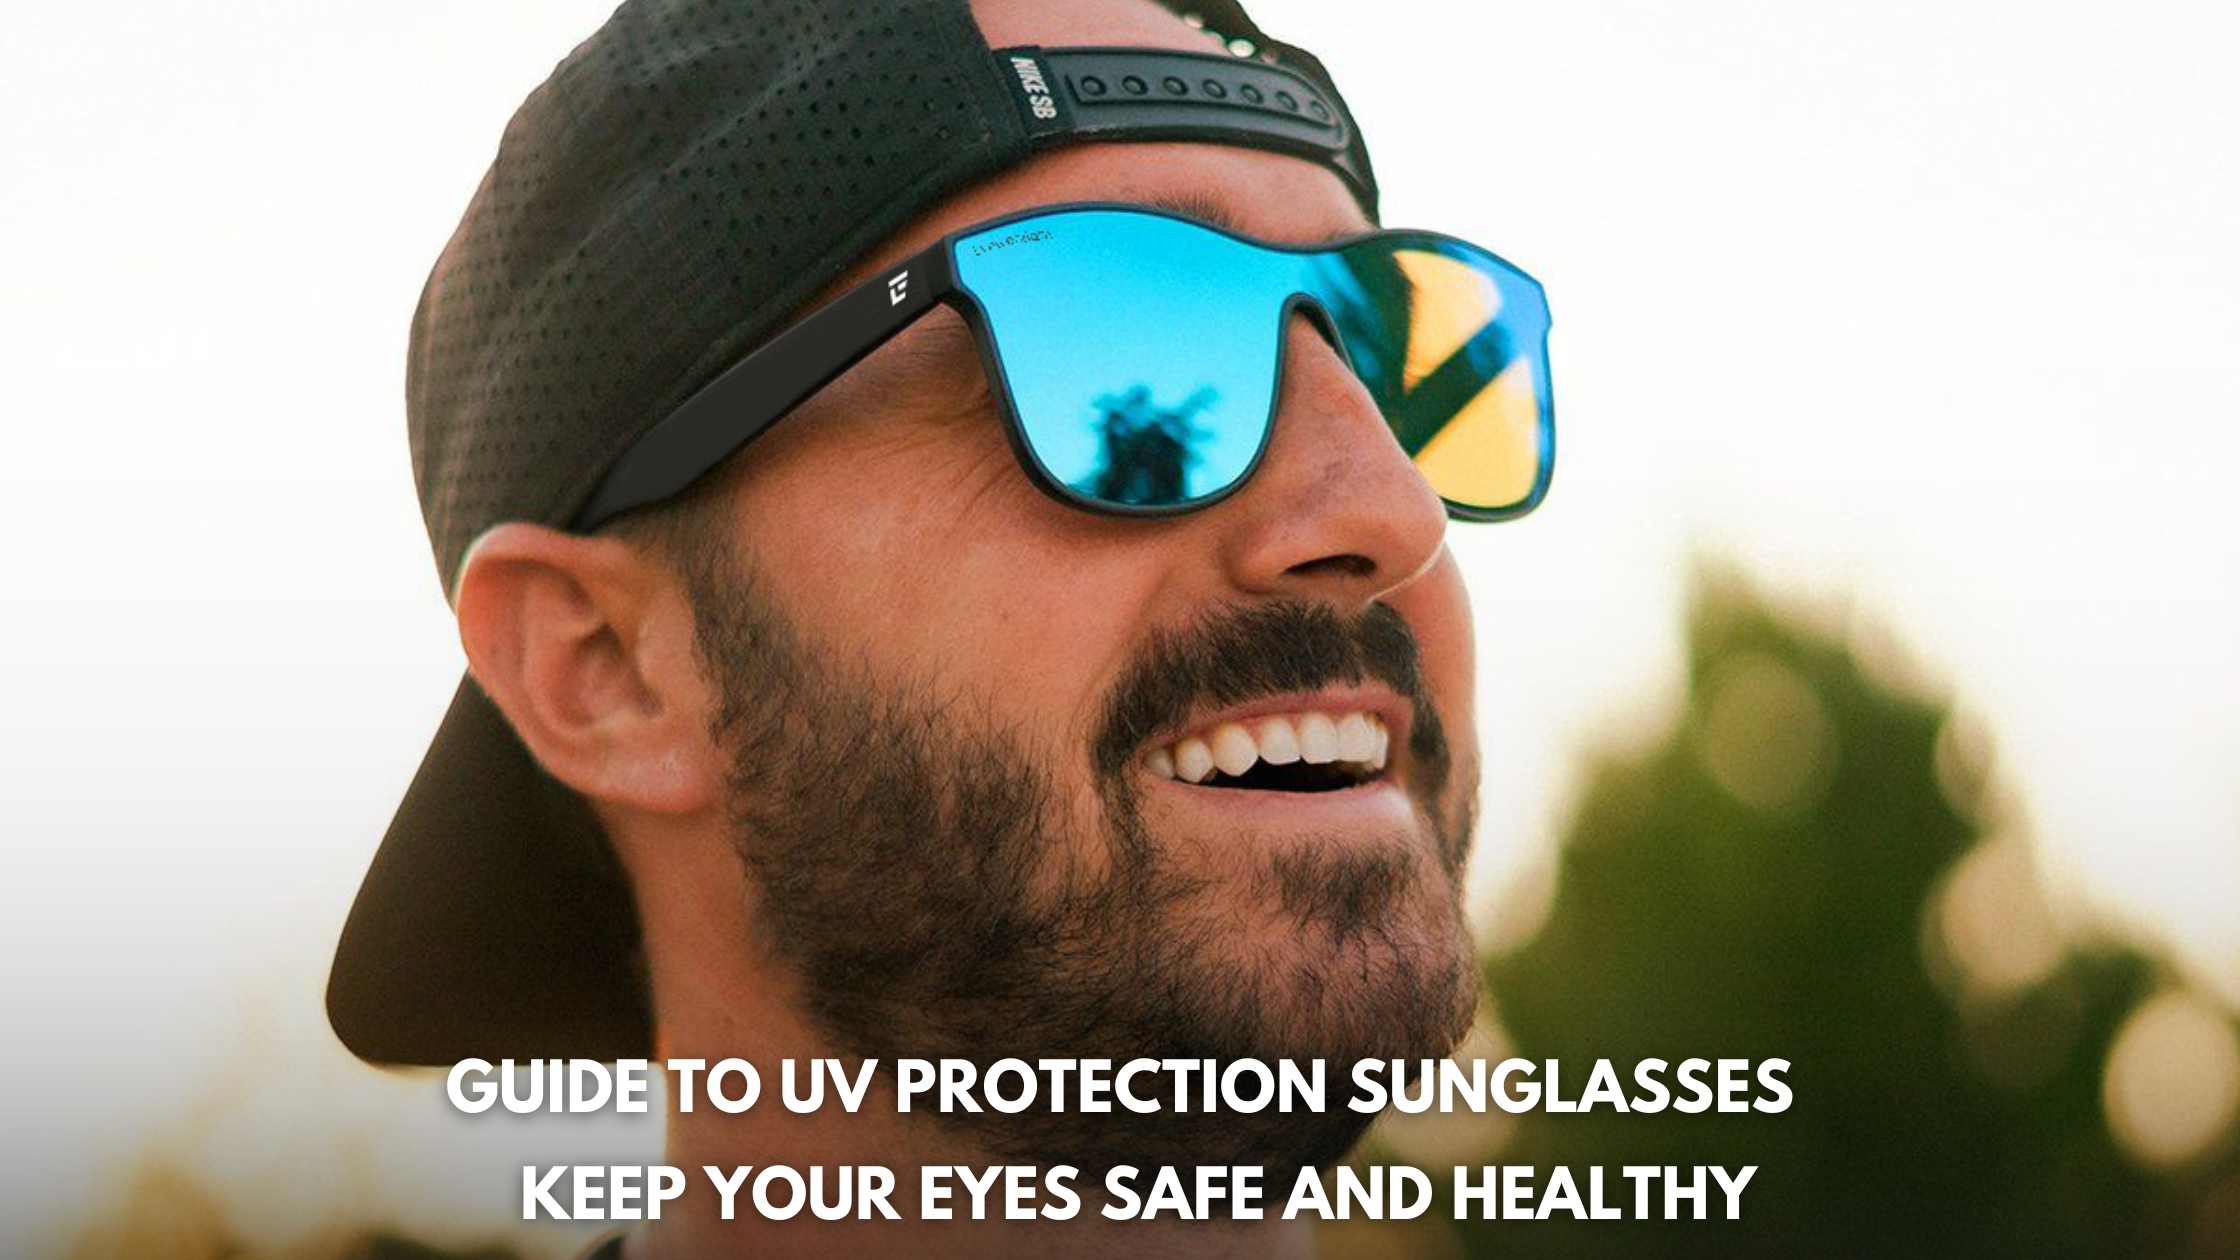 Guide to UV Protection Sunglasses: Keep Your Eyes Safe and Healthy